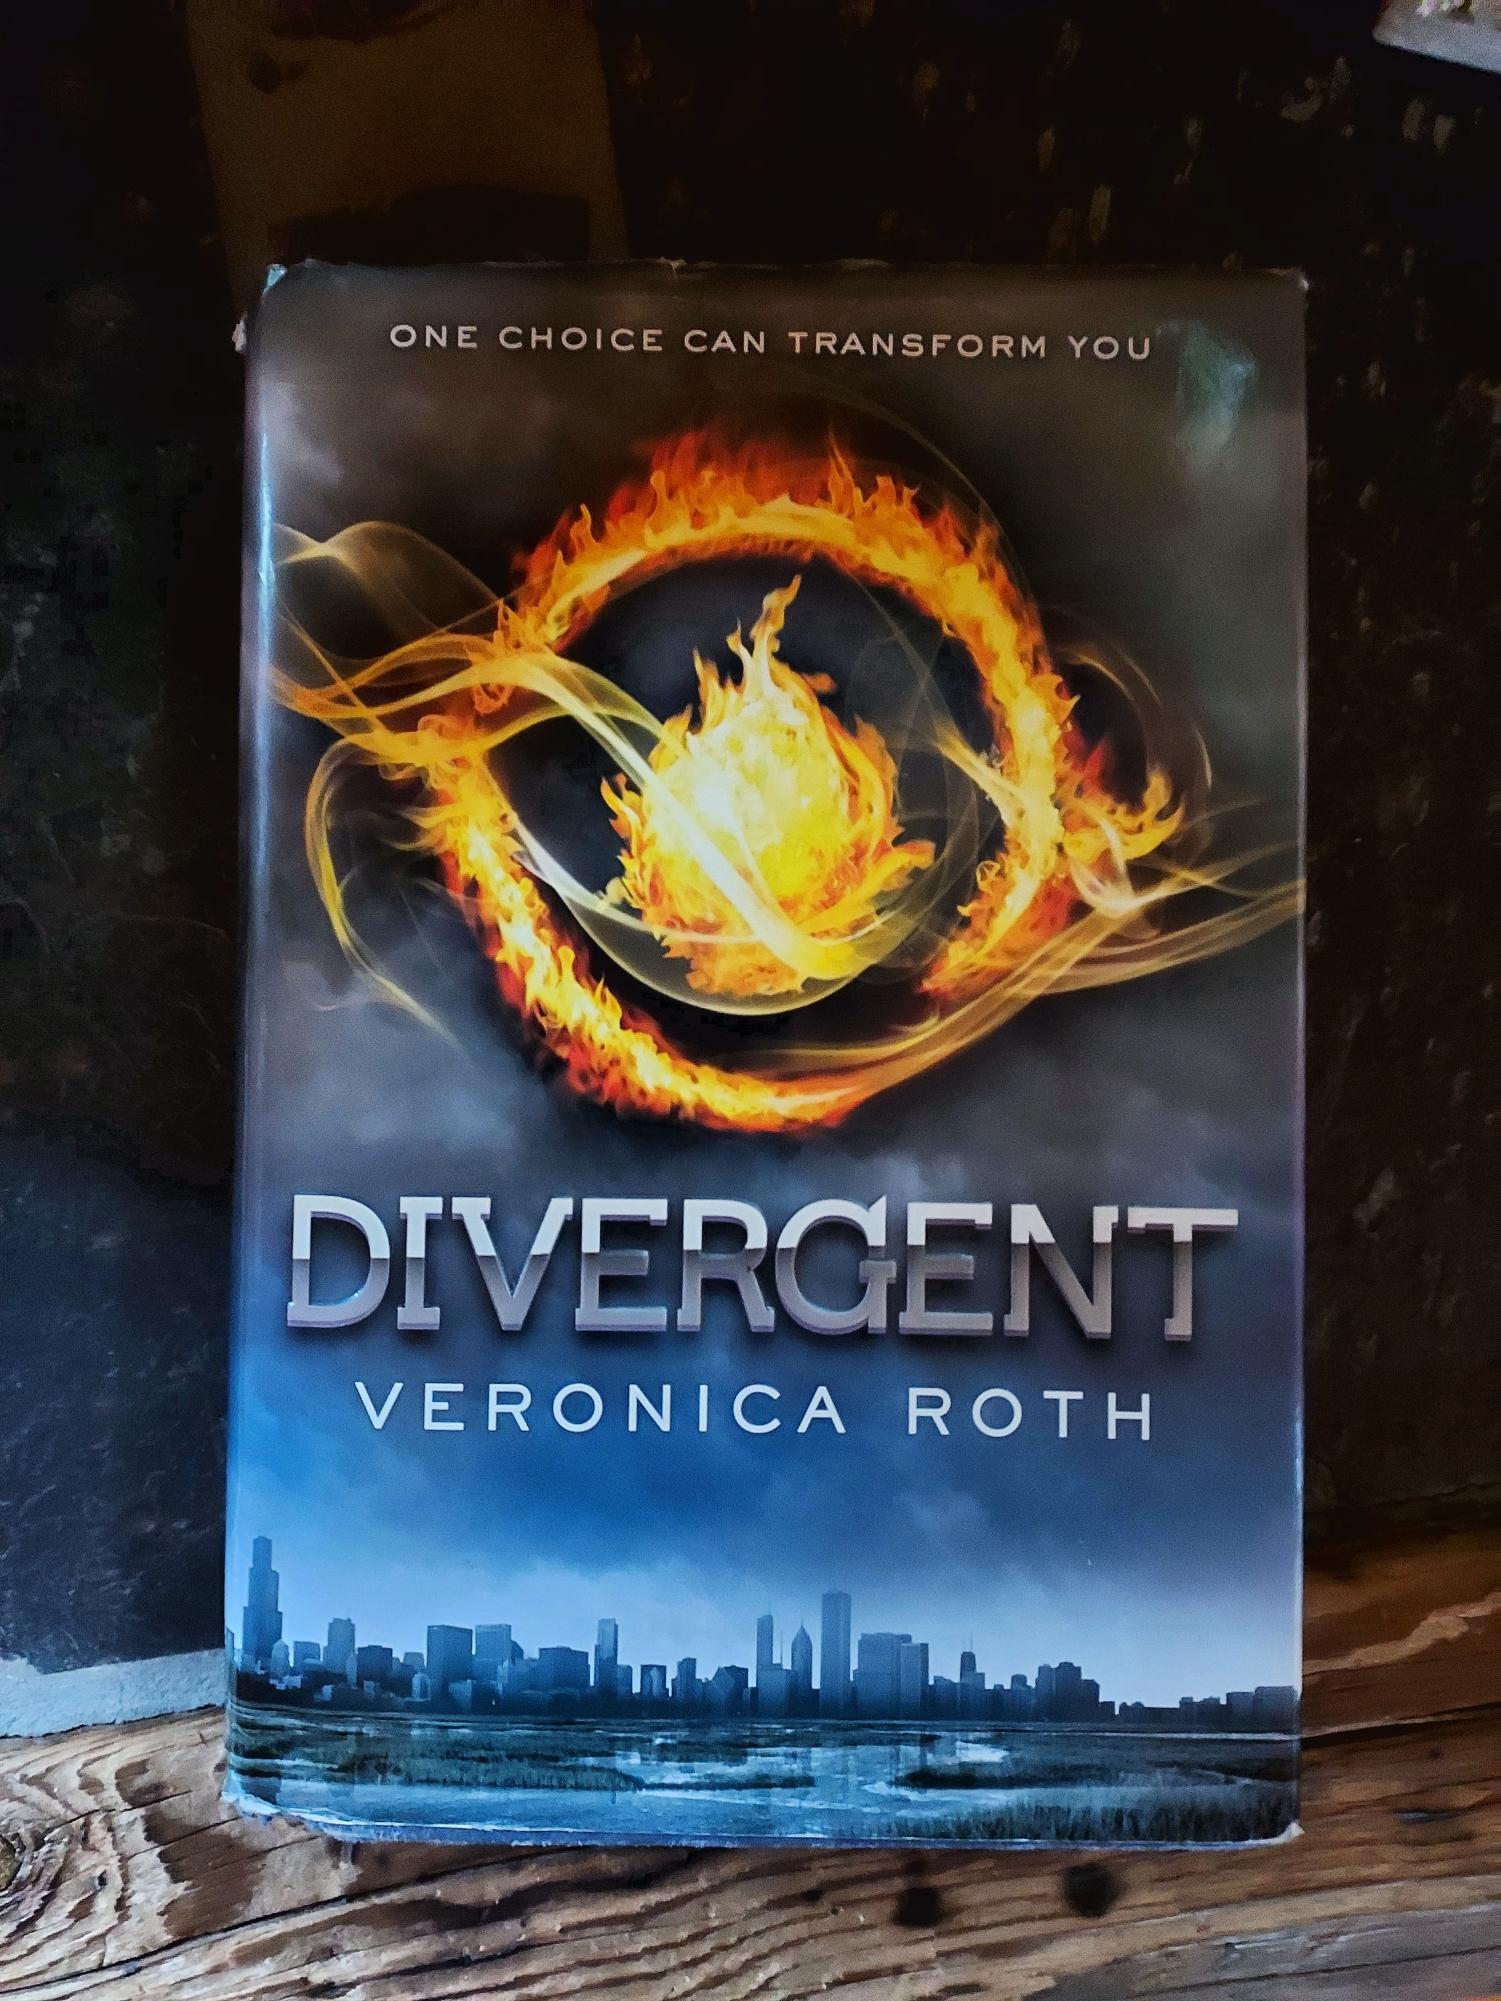 The first book of the series, Divergent by Veronica Roth. 